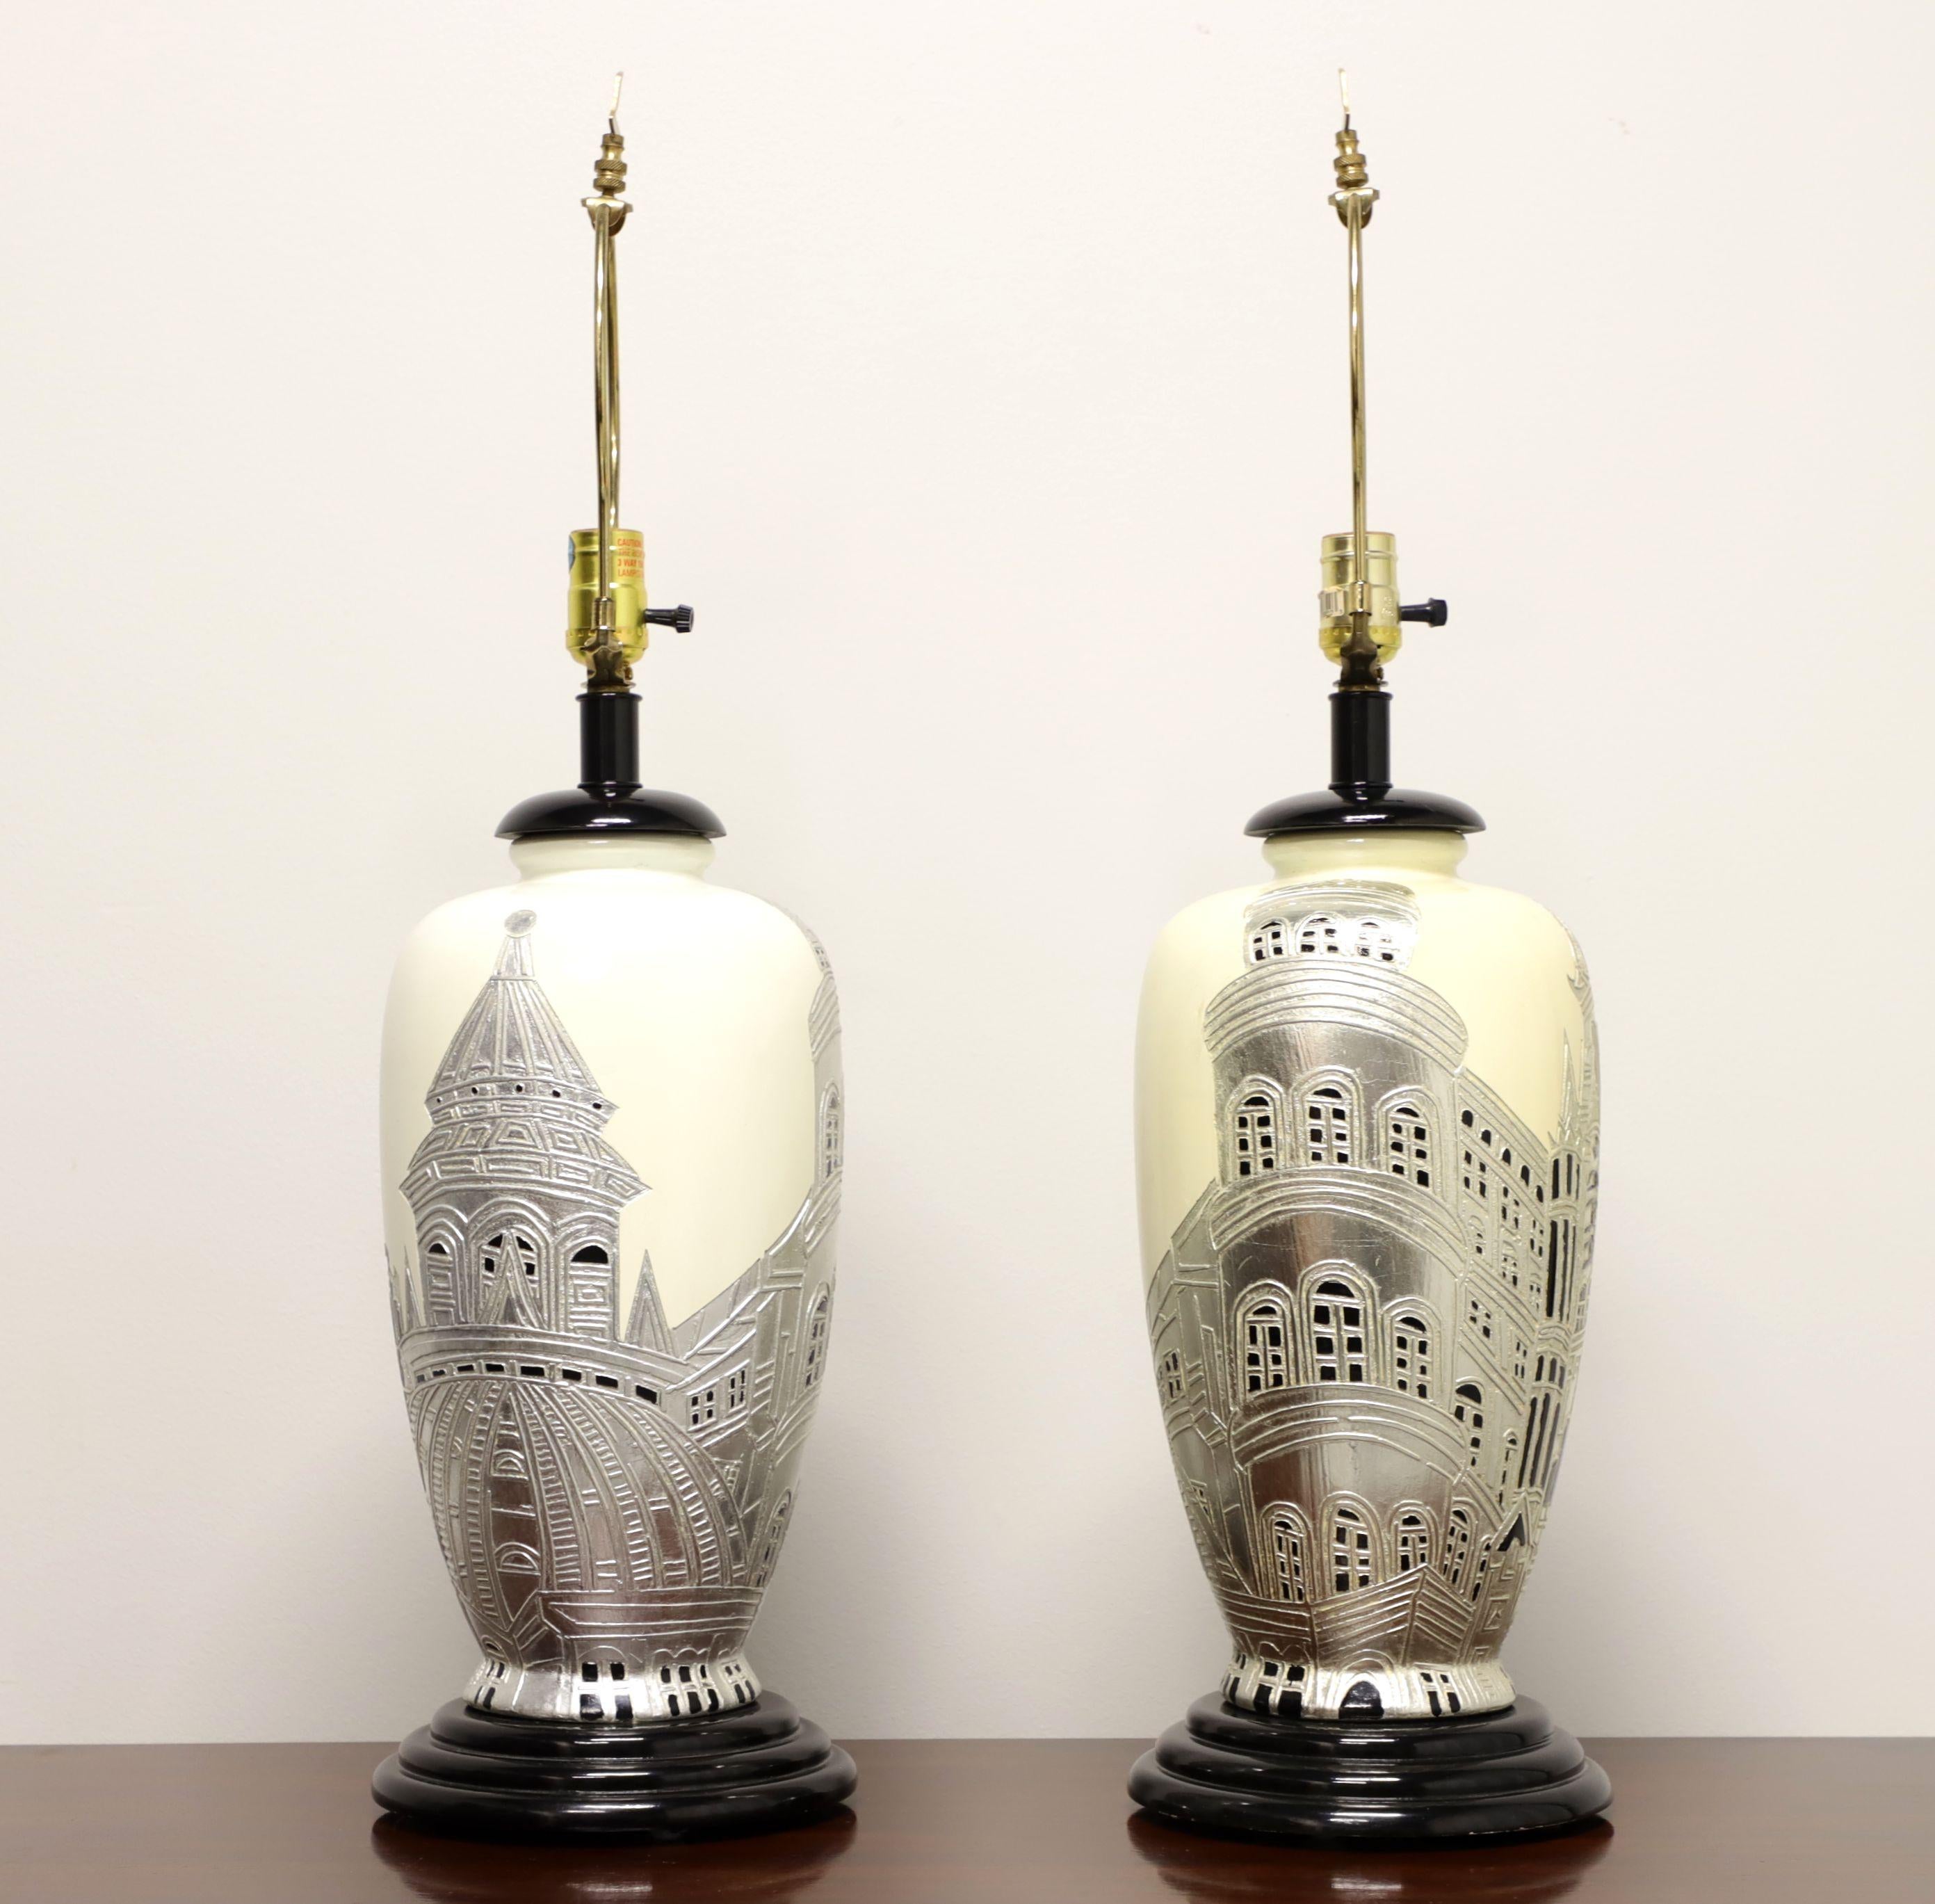 A pair of Asian style table lamps, unbranded. Made of porcelain in an urn style with a creamy white background, silver and black Chinoiserie painted scene, on a black painted wood base. Has metal harps and finials. Single standard bulb socket and